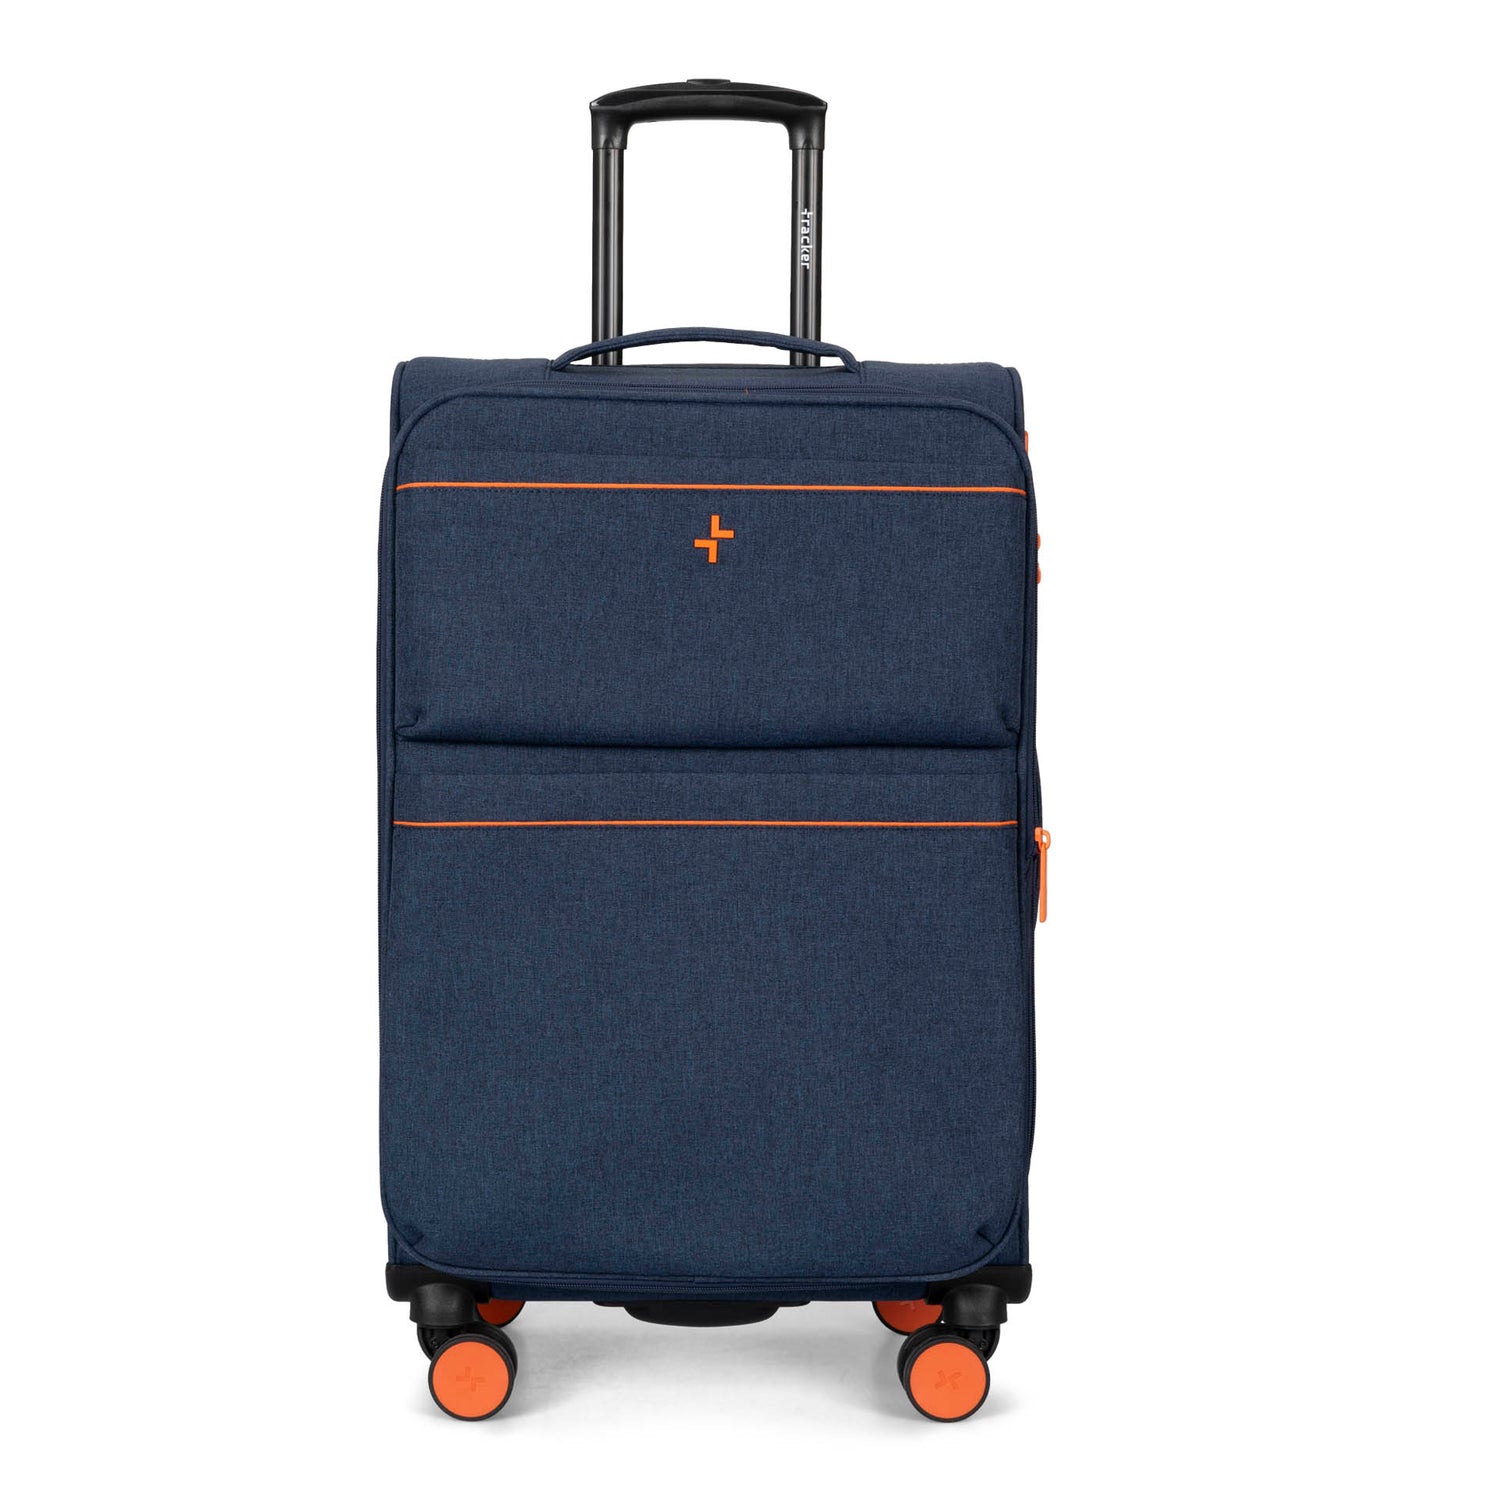 Valise souple 26 po Expedition